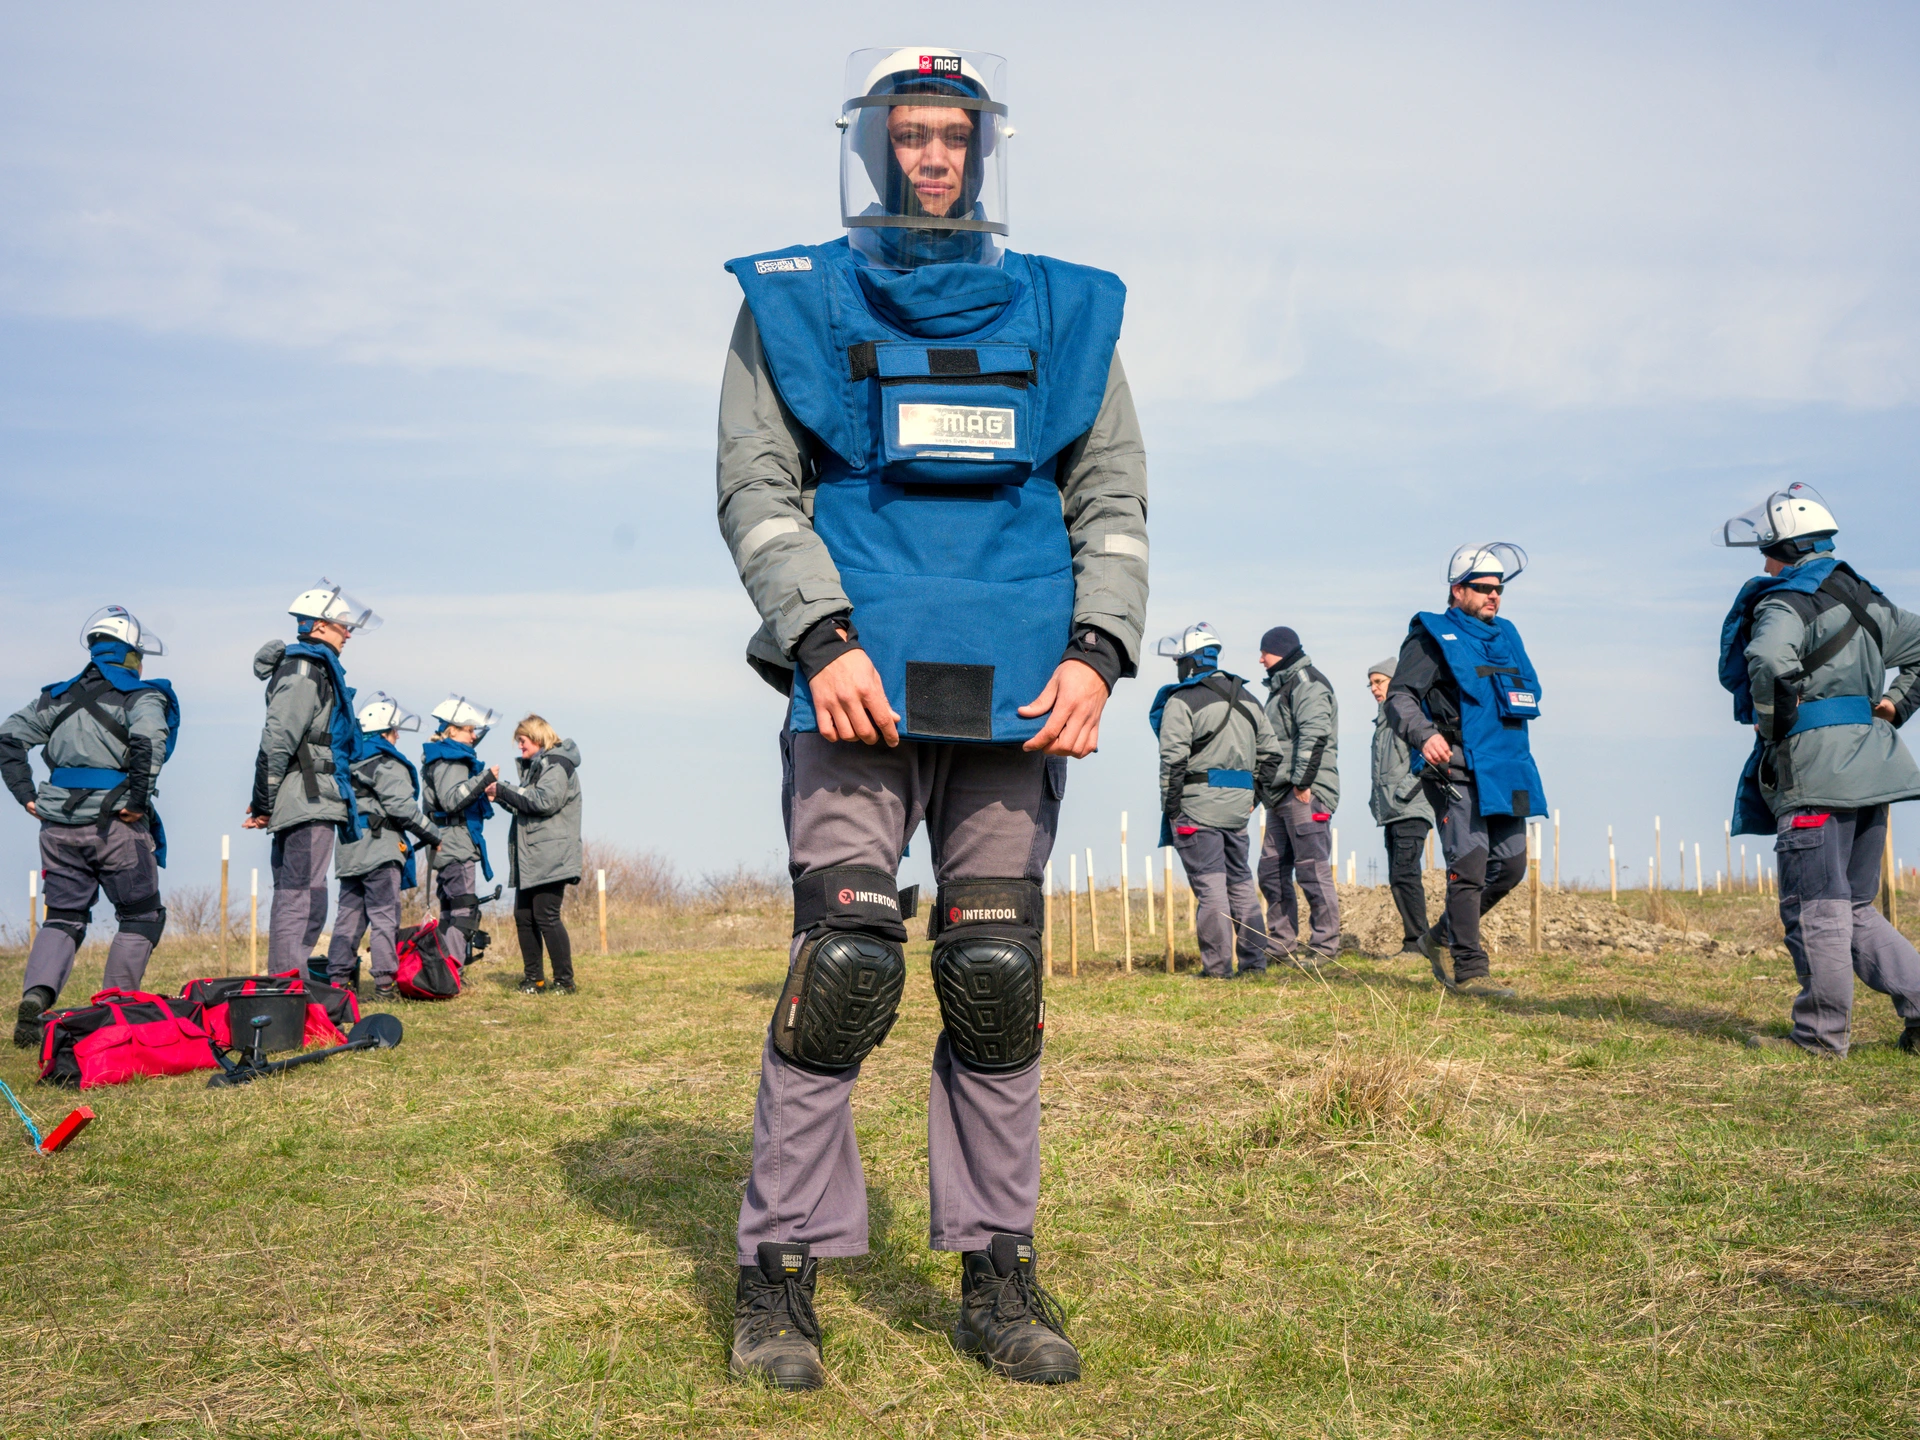 A man stands in a field with short grass, and a blue sky covered with wispy clouds. He is wearing black, ankle-high boots, mauve trousers, black kneepads, a grey jacket with visibility stripes on its sleeves, and a blue protective vest. He is wearing a white helmet over a black hood, and a transparent plastic visor covers his face. His hands are gripping the bottom of his blue protective vest, at the front, on either side. Behind him on both sides are two groups of similarly dressed people, who are standing next to an area marked off by wooden posts painted white on their tops. They all face away from the camera, looking ahead in the same direction. The man is Oleksander Kuchen, a deminer with Mines Advisory Group, a non-governmental organization that assists people affected by landmines, unexploded ordnance, and small arms and light weapons. He is pictured in Taborivka, a village in Mykolaiv Oblast, in the south of Ukraine.